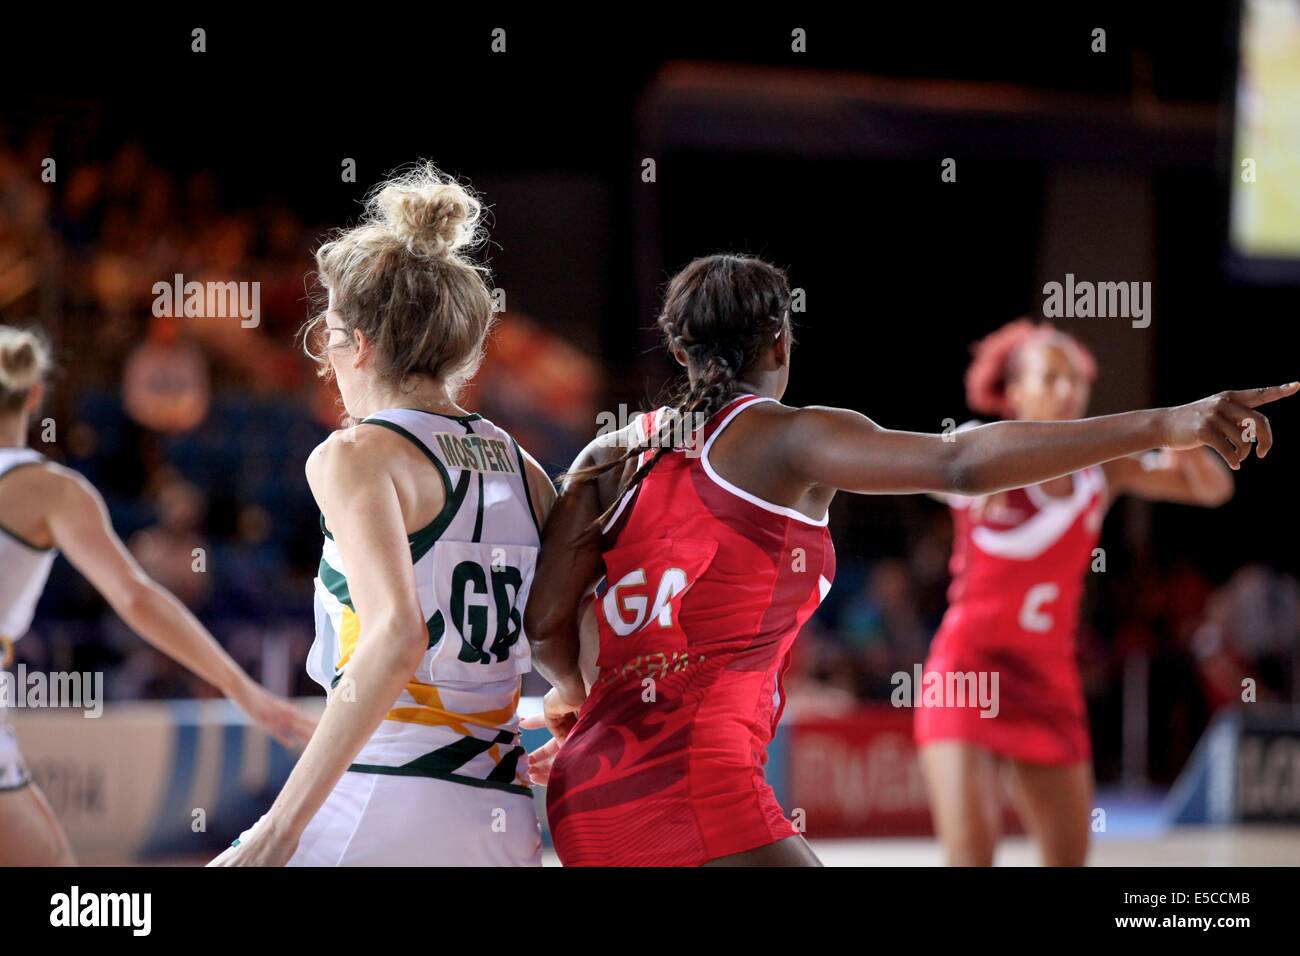 Glasgow, Scotland, UK. 27th July 2014. Commonwealth Games day 4. Netball - England v South Africa in the preliminary round of competition.  England won 41-35.  Mostert (South Africa) and Kadeen Corbin (England) Credit:  Neville Styles/Alamy Live News Stock Photo